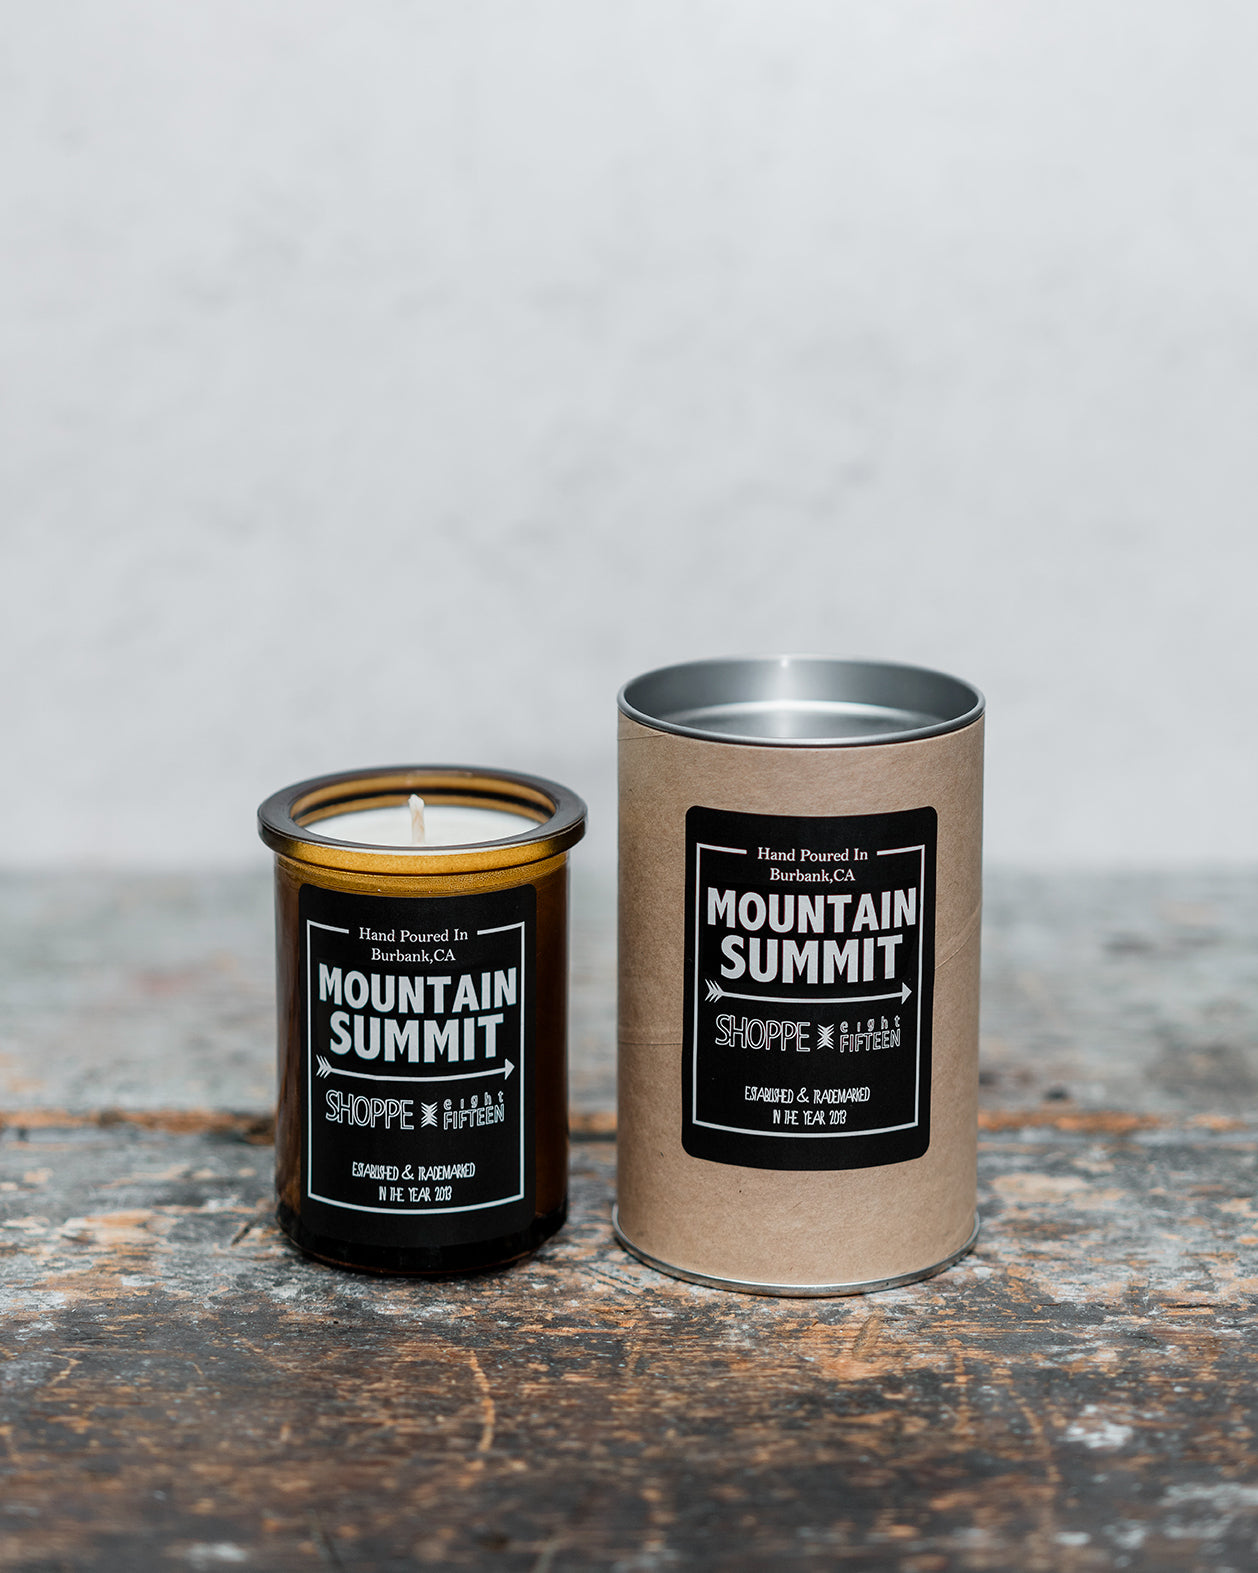 Mountain Summit amber glass candle on wooden shelf with packaging